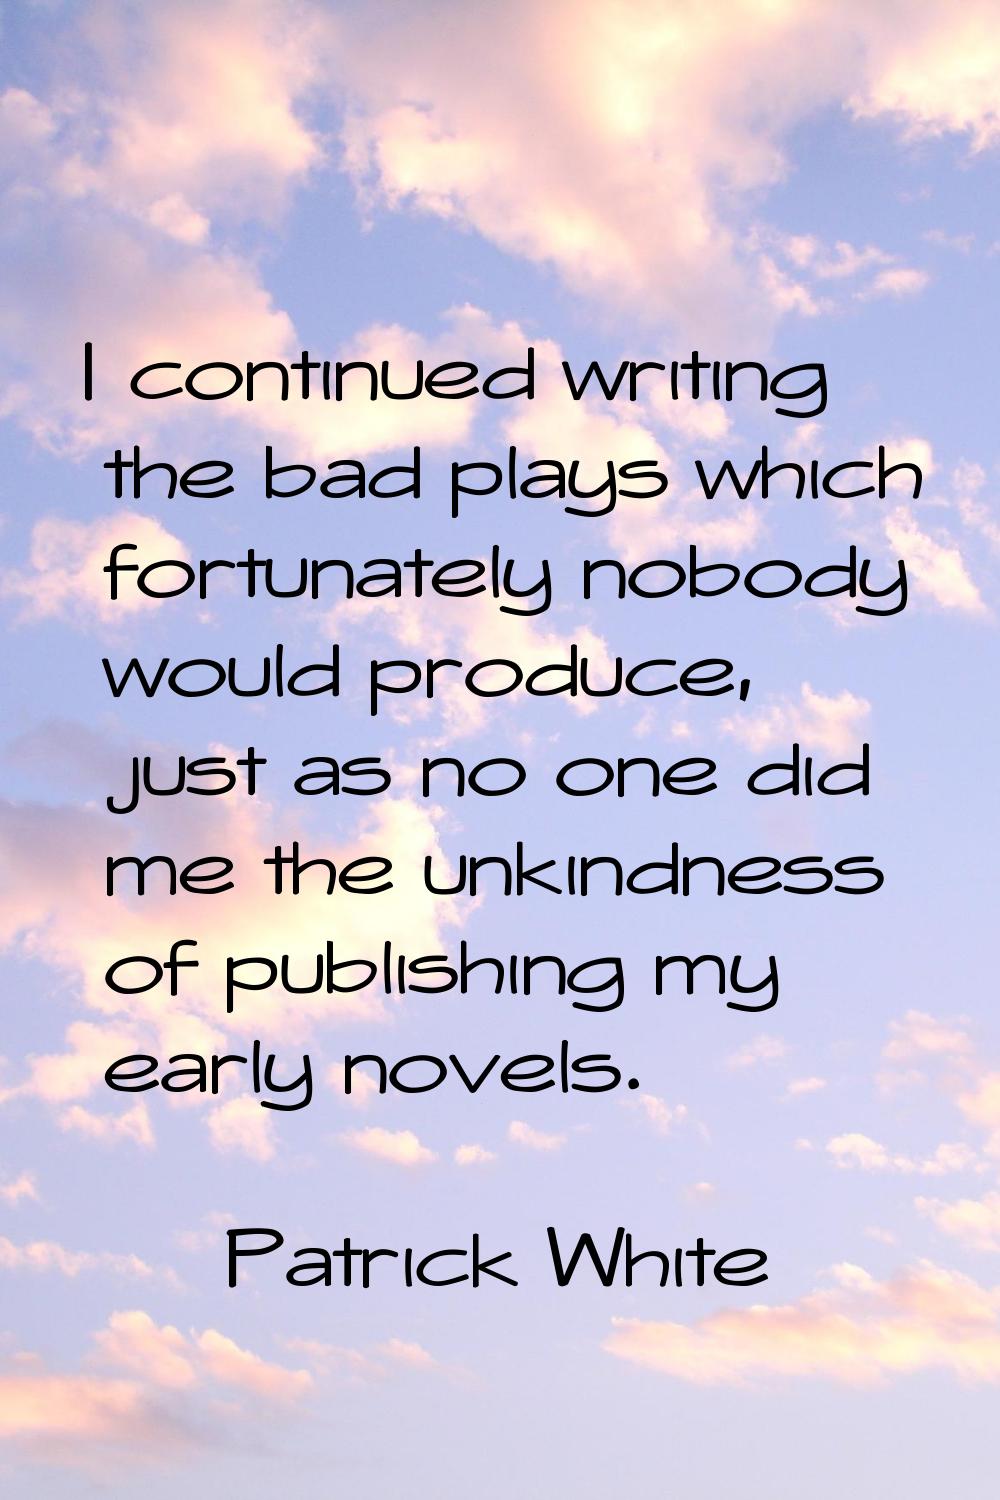 I continued writing the bad plays which fortunately nobody would produce, just as no one did me the